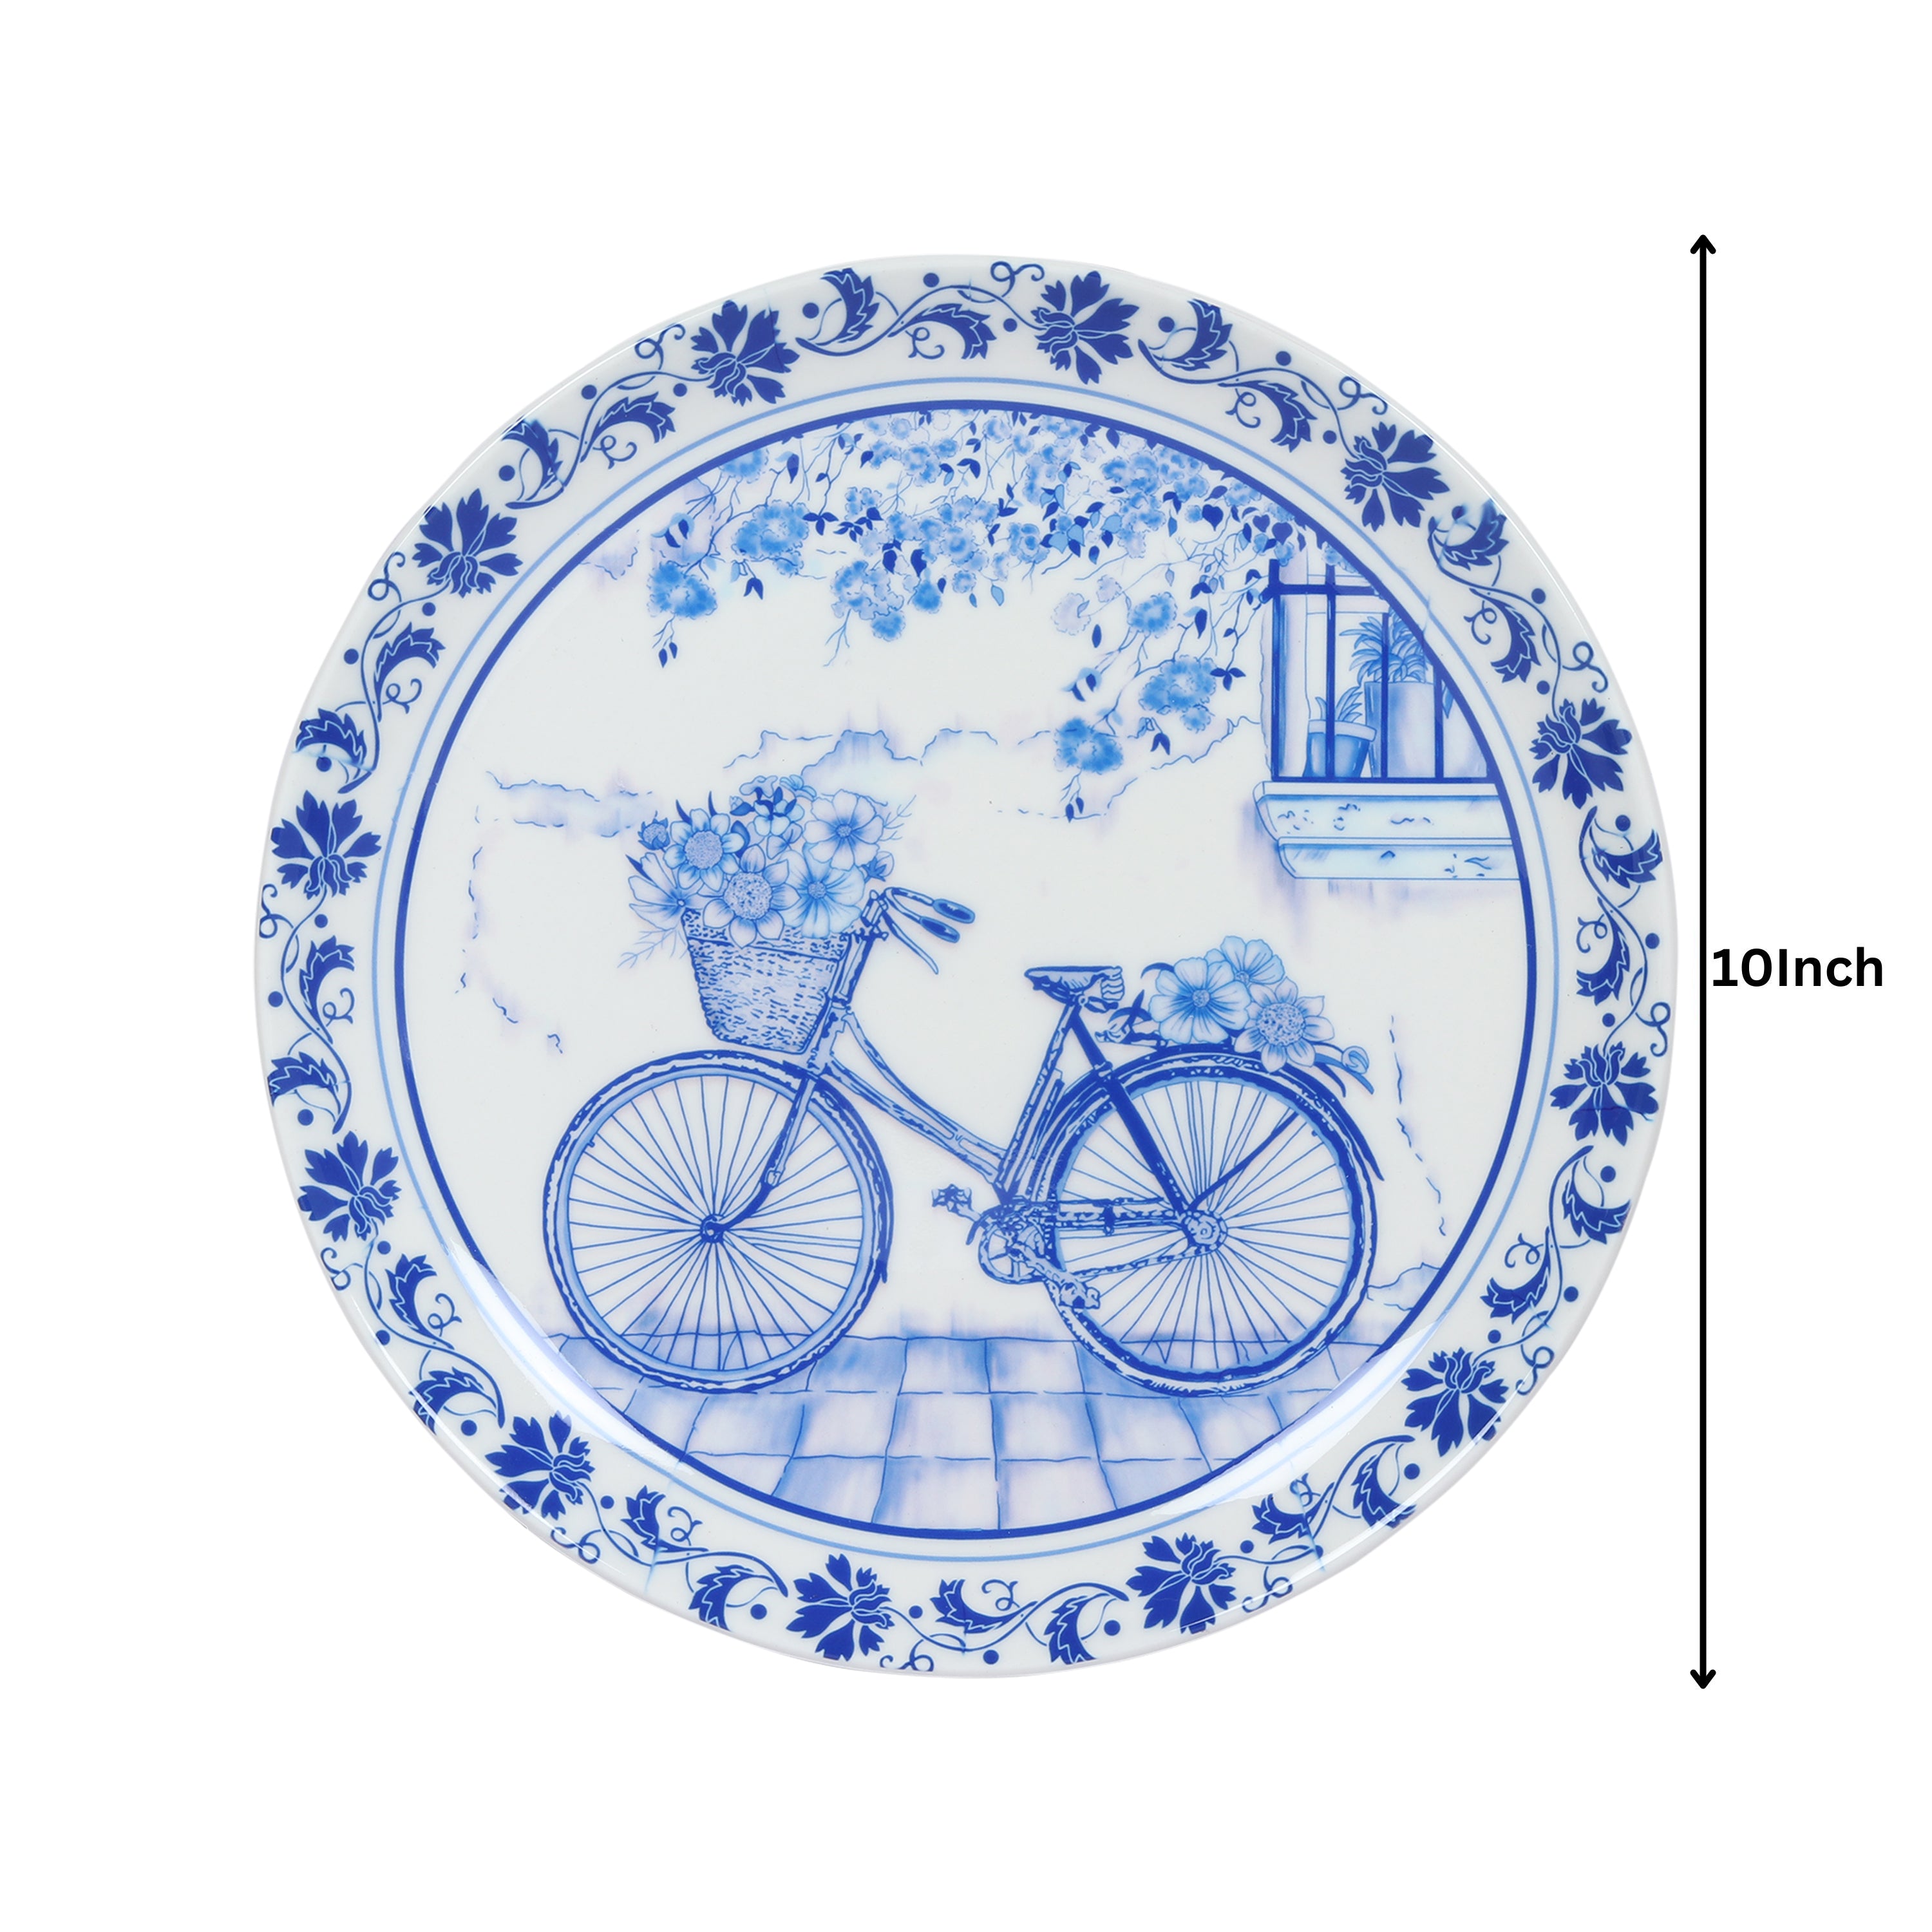 Decorative Wall Plate - Vintage Cycle Blue Pottery